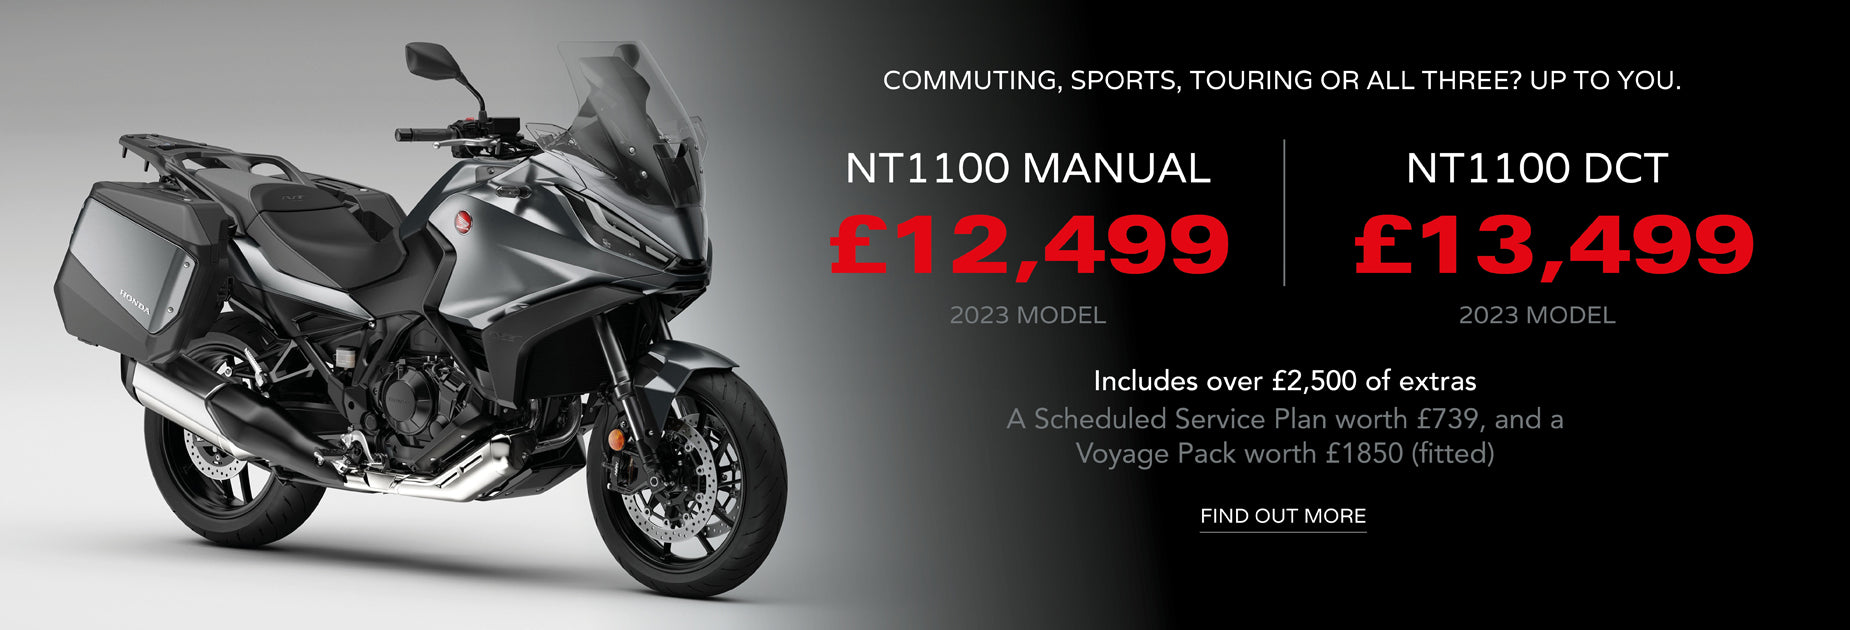 Honda of Bournemouth, New Bikes from Honda, Offers and Deal NT1100